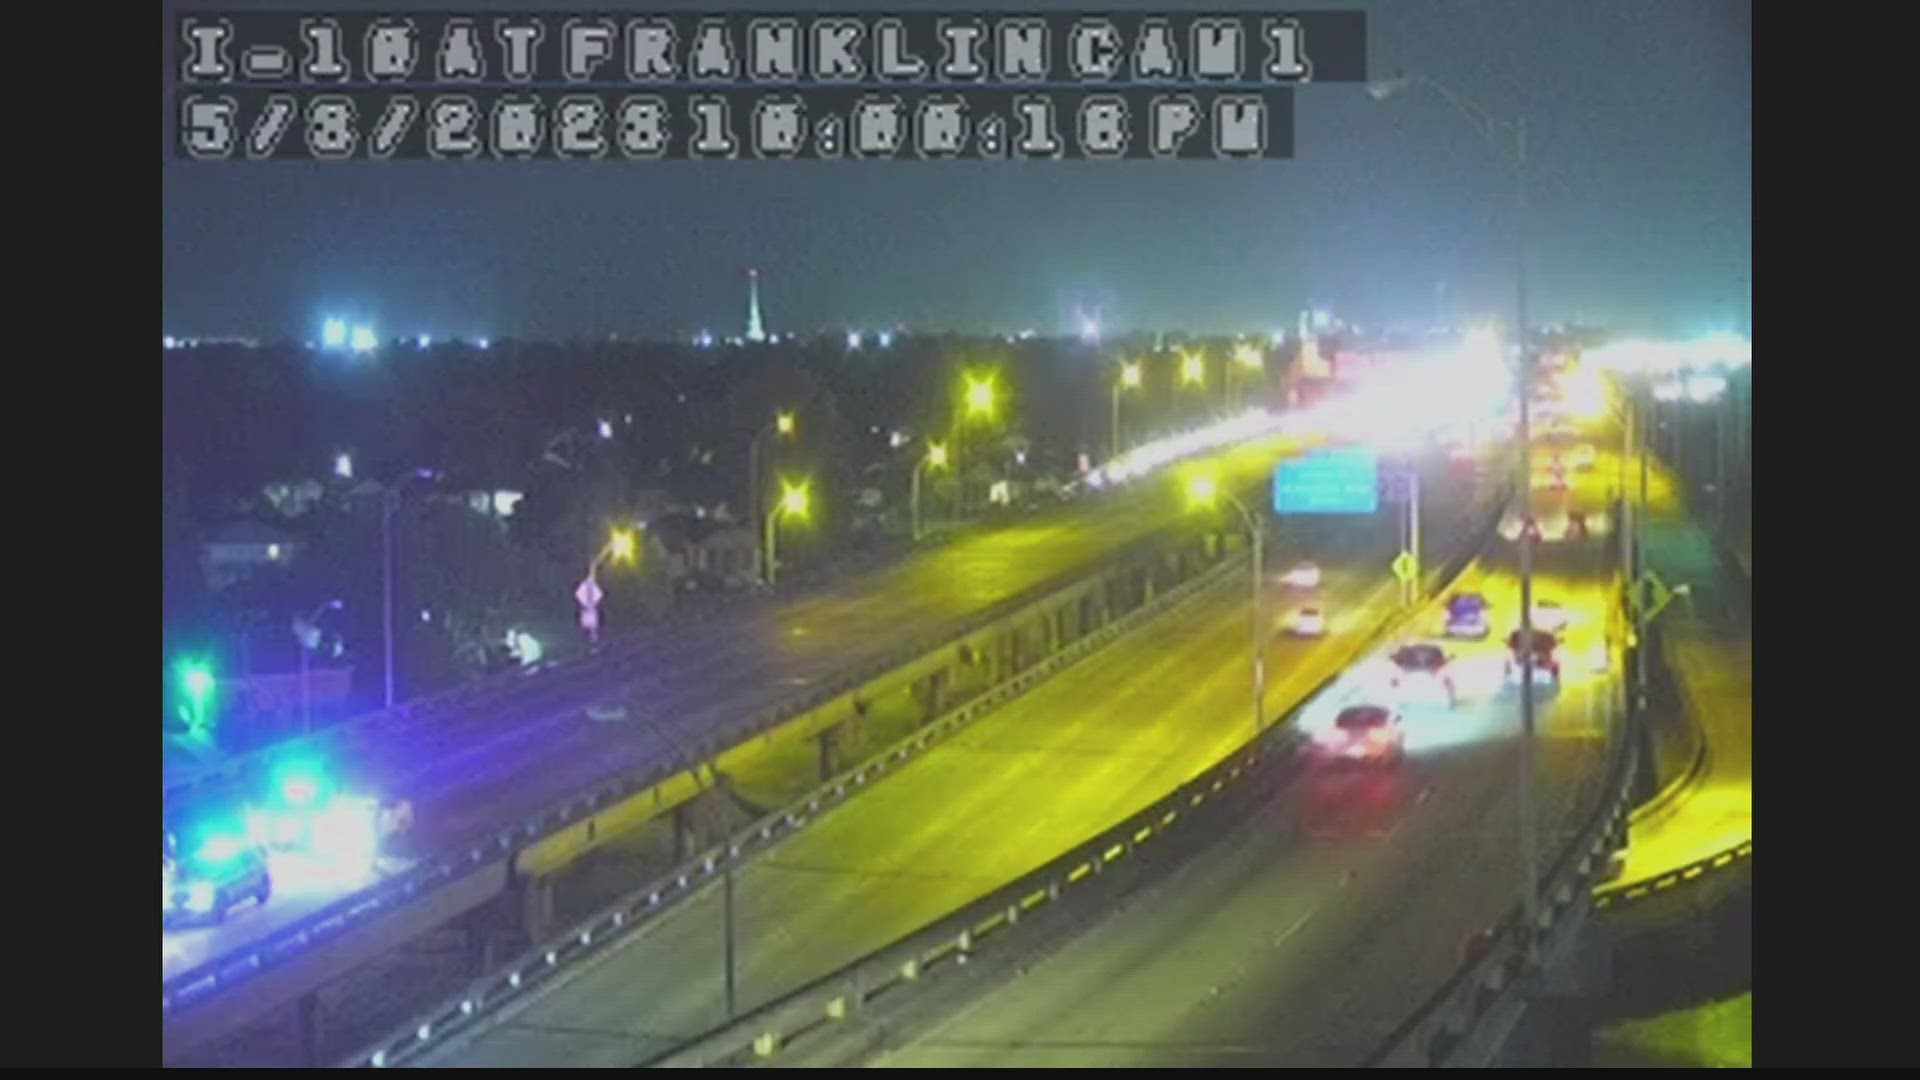 The crash occurred just before 9 p.m. on Wednesday on Interstate 610 West at Franklin Avenue.